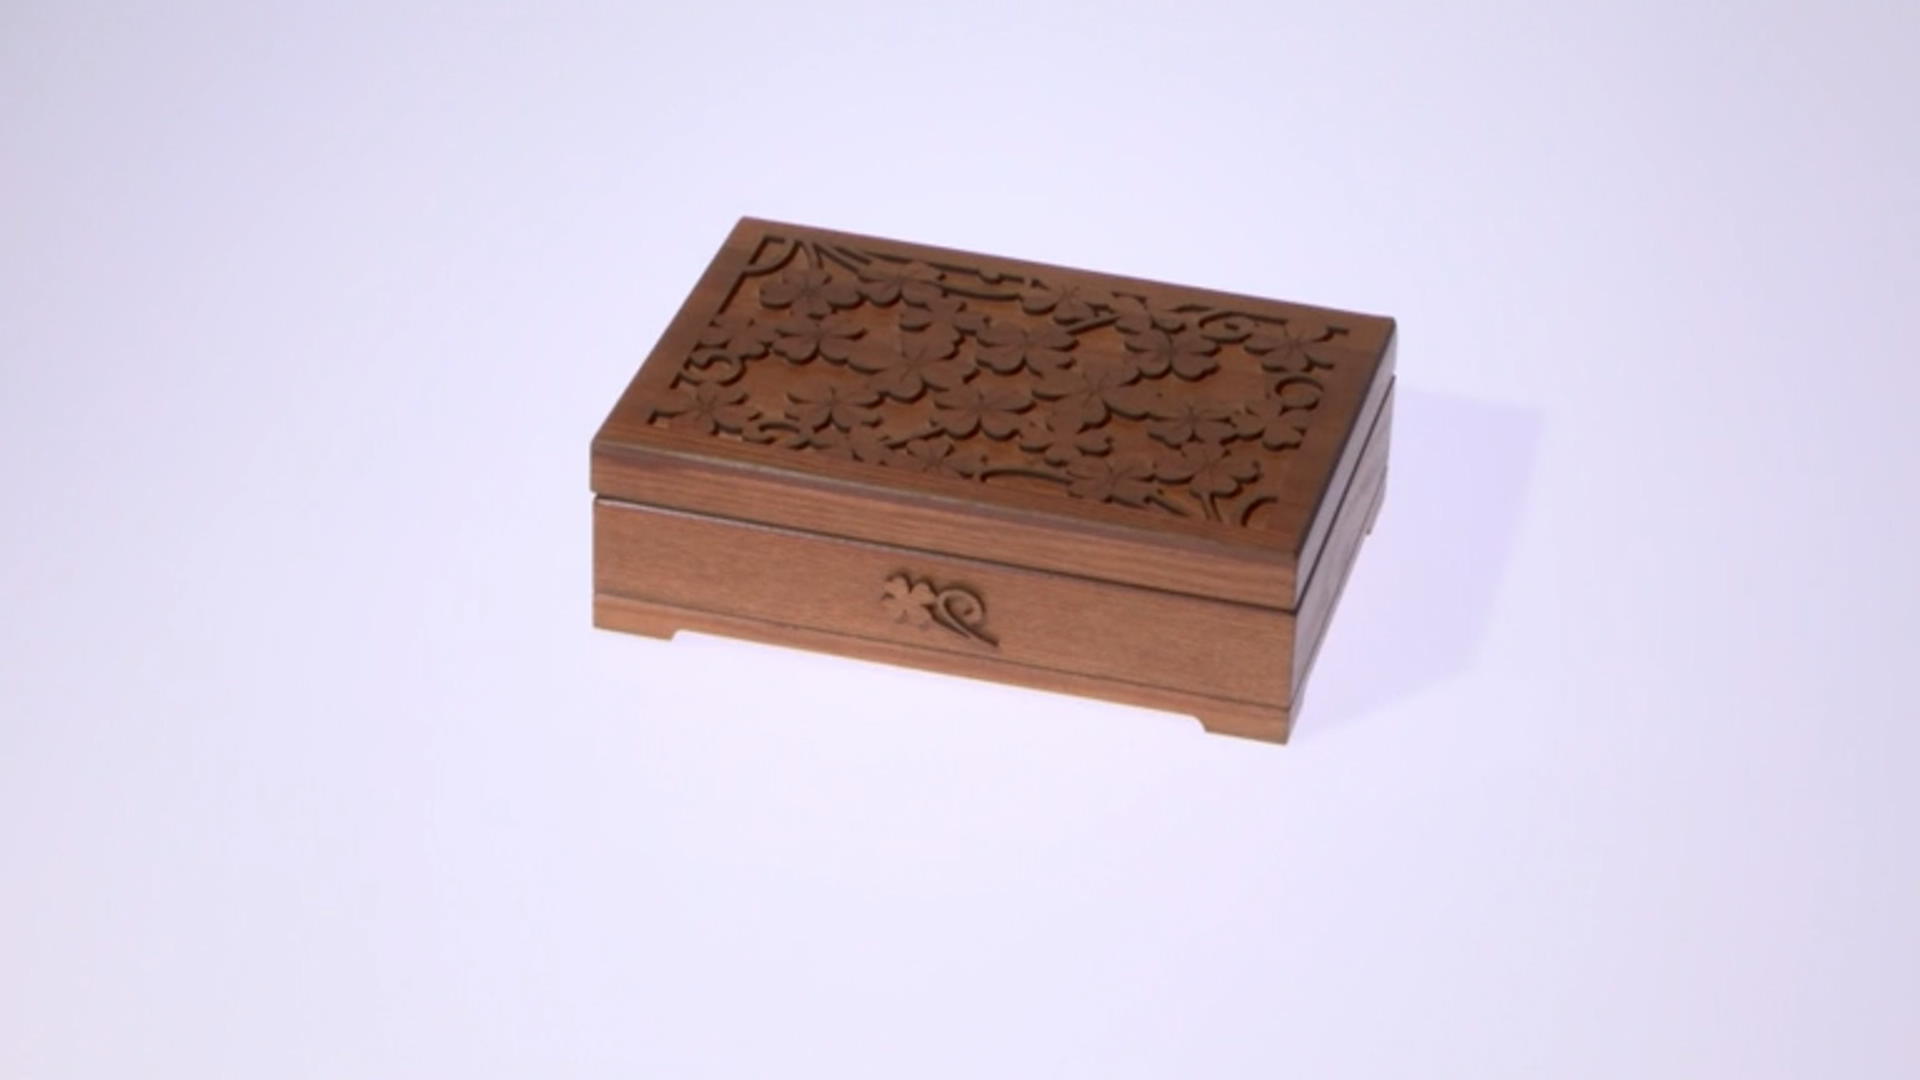 Floral Pierced Carved Wooden Jewelry Box Video Thumbnail